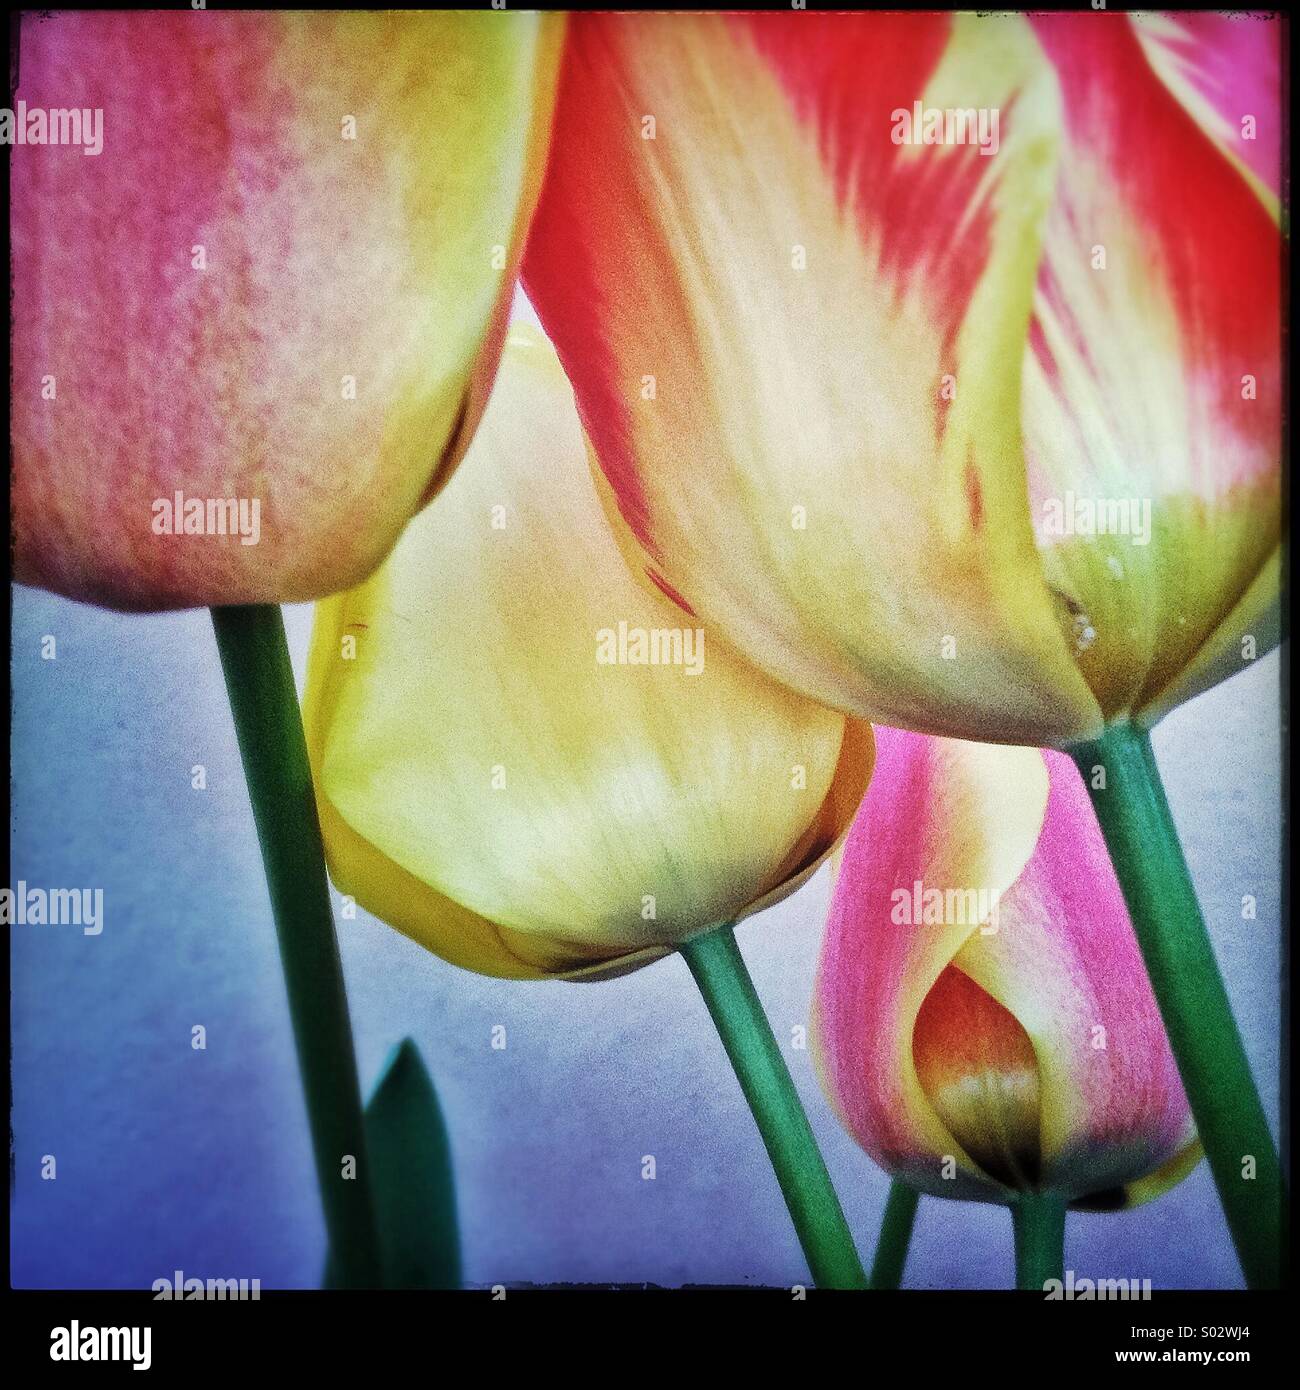 Colourful tulips flower Stock Photo